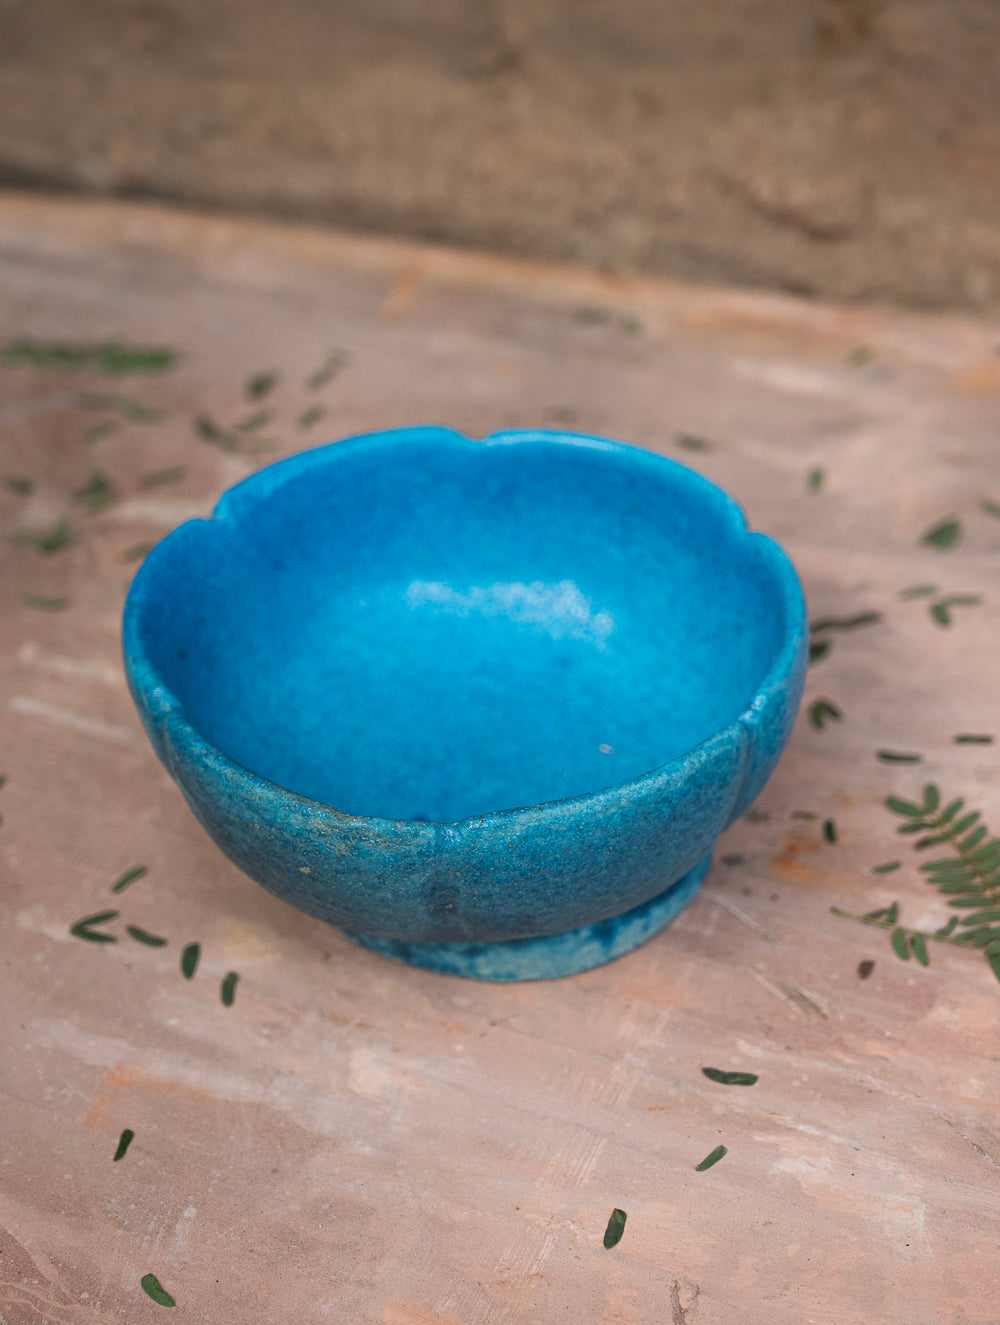 Load image into Gallery viewer, Delhi Blue Art Pottery Curio / Flower Shaped Utility Bowl